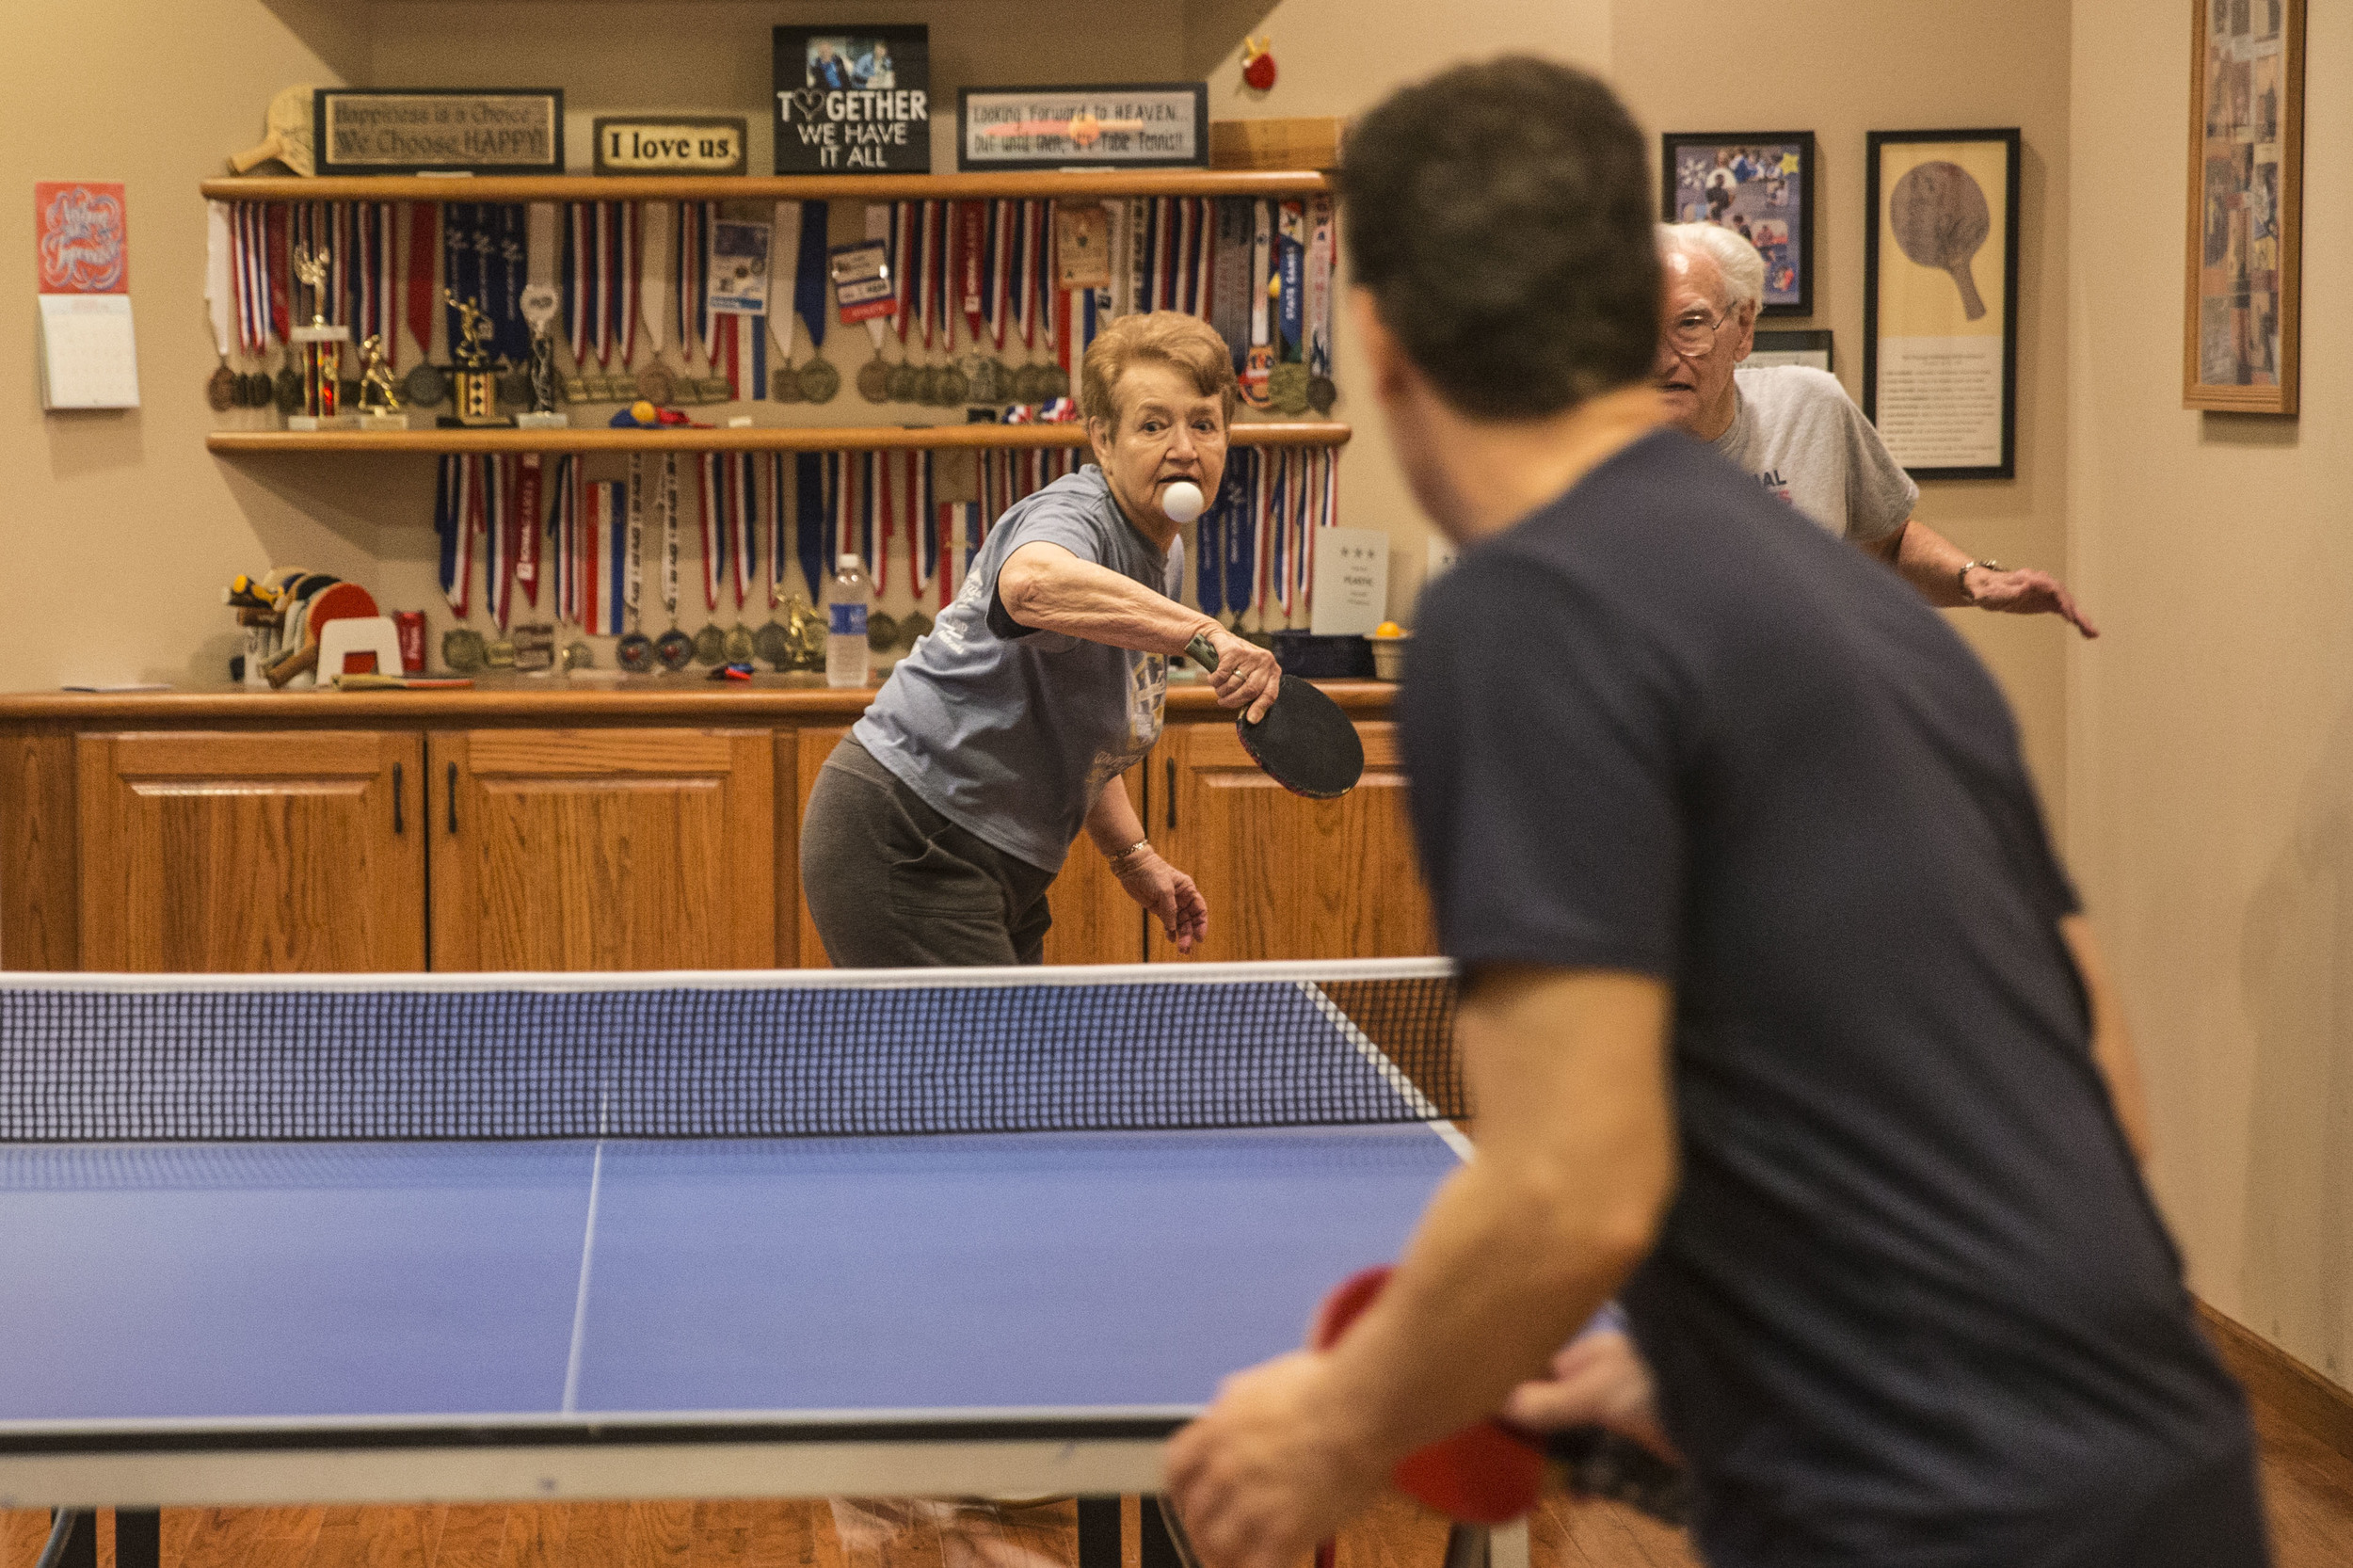 Jared & Leia play table tennis at their house's basement